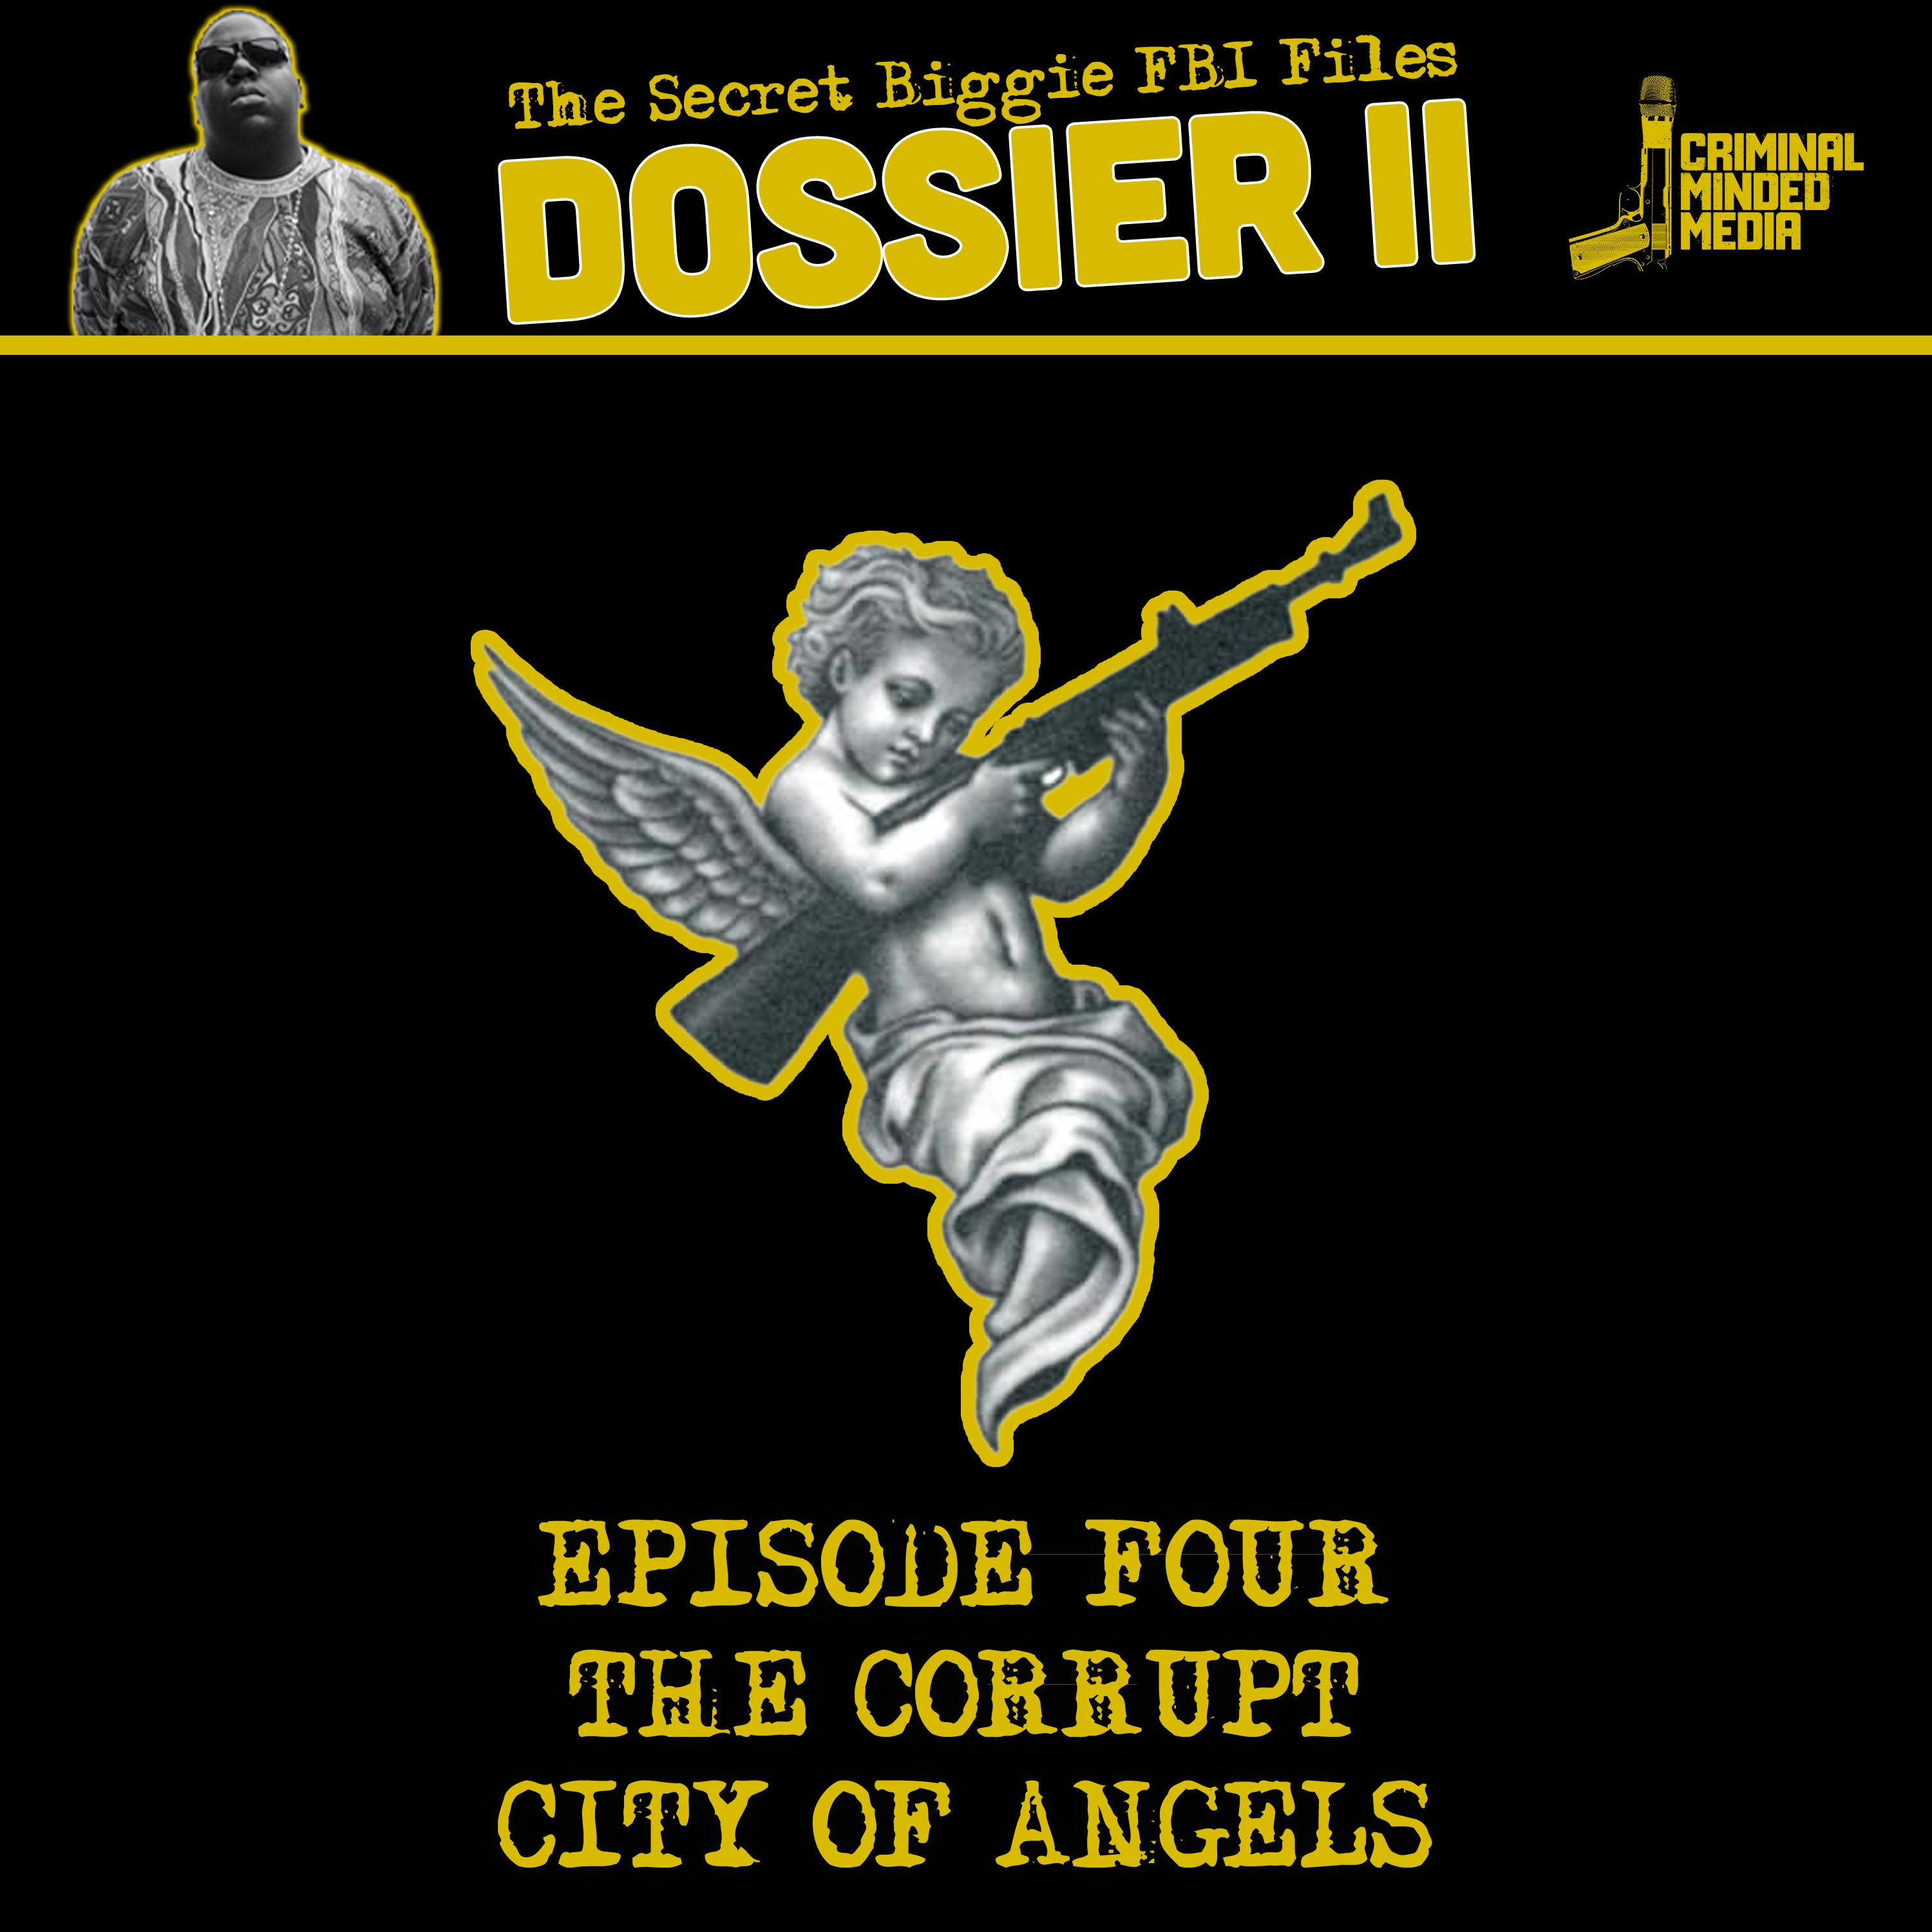 DOSSIER SEASON II - EP. 4: THE CORRUPT CITY OF ANGELS